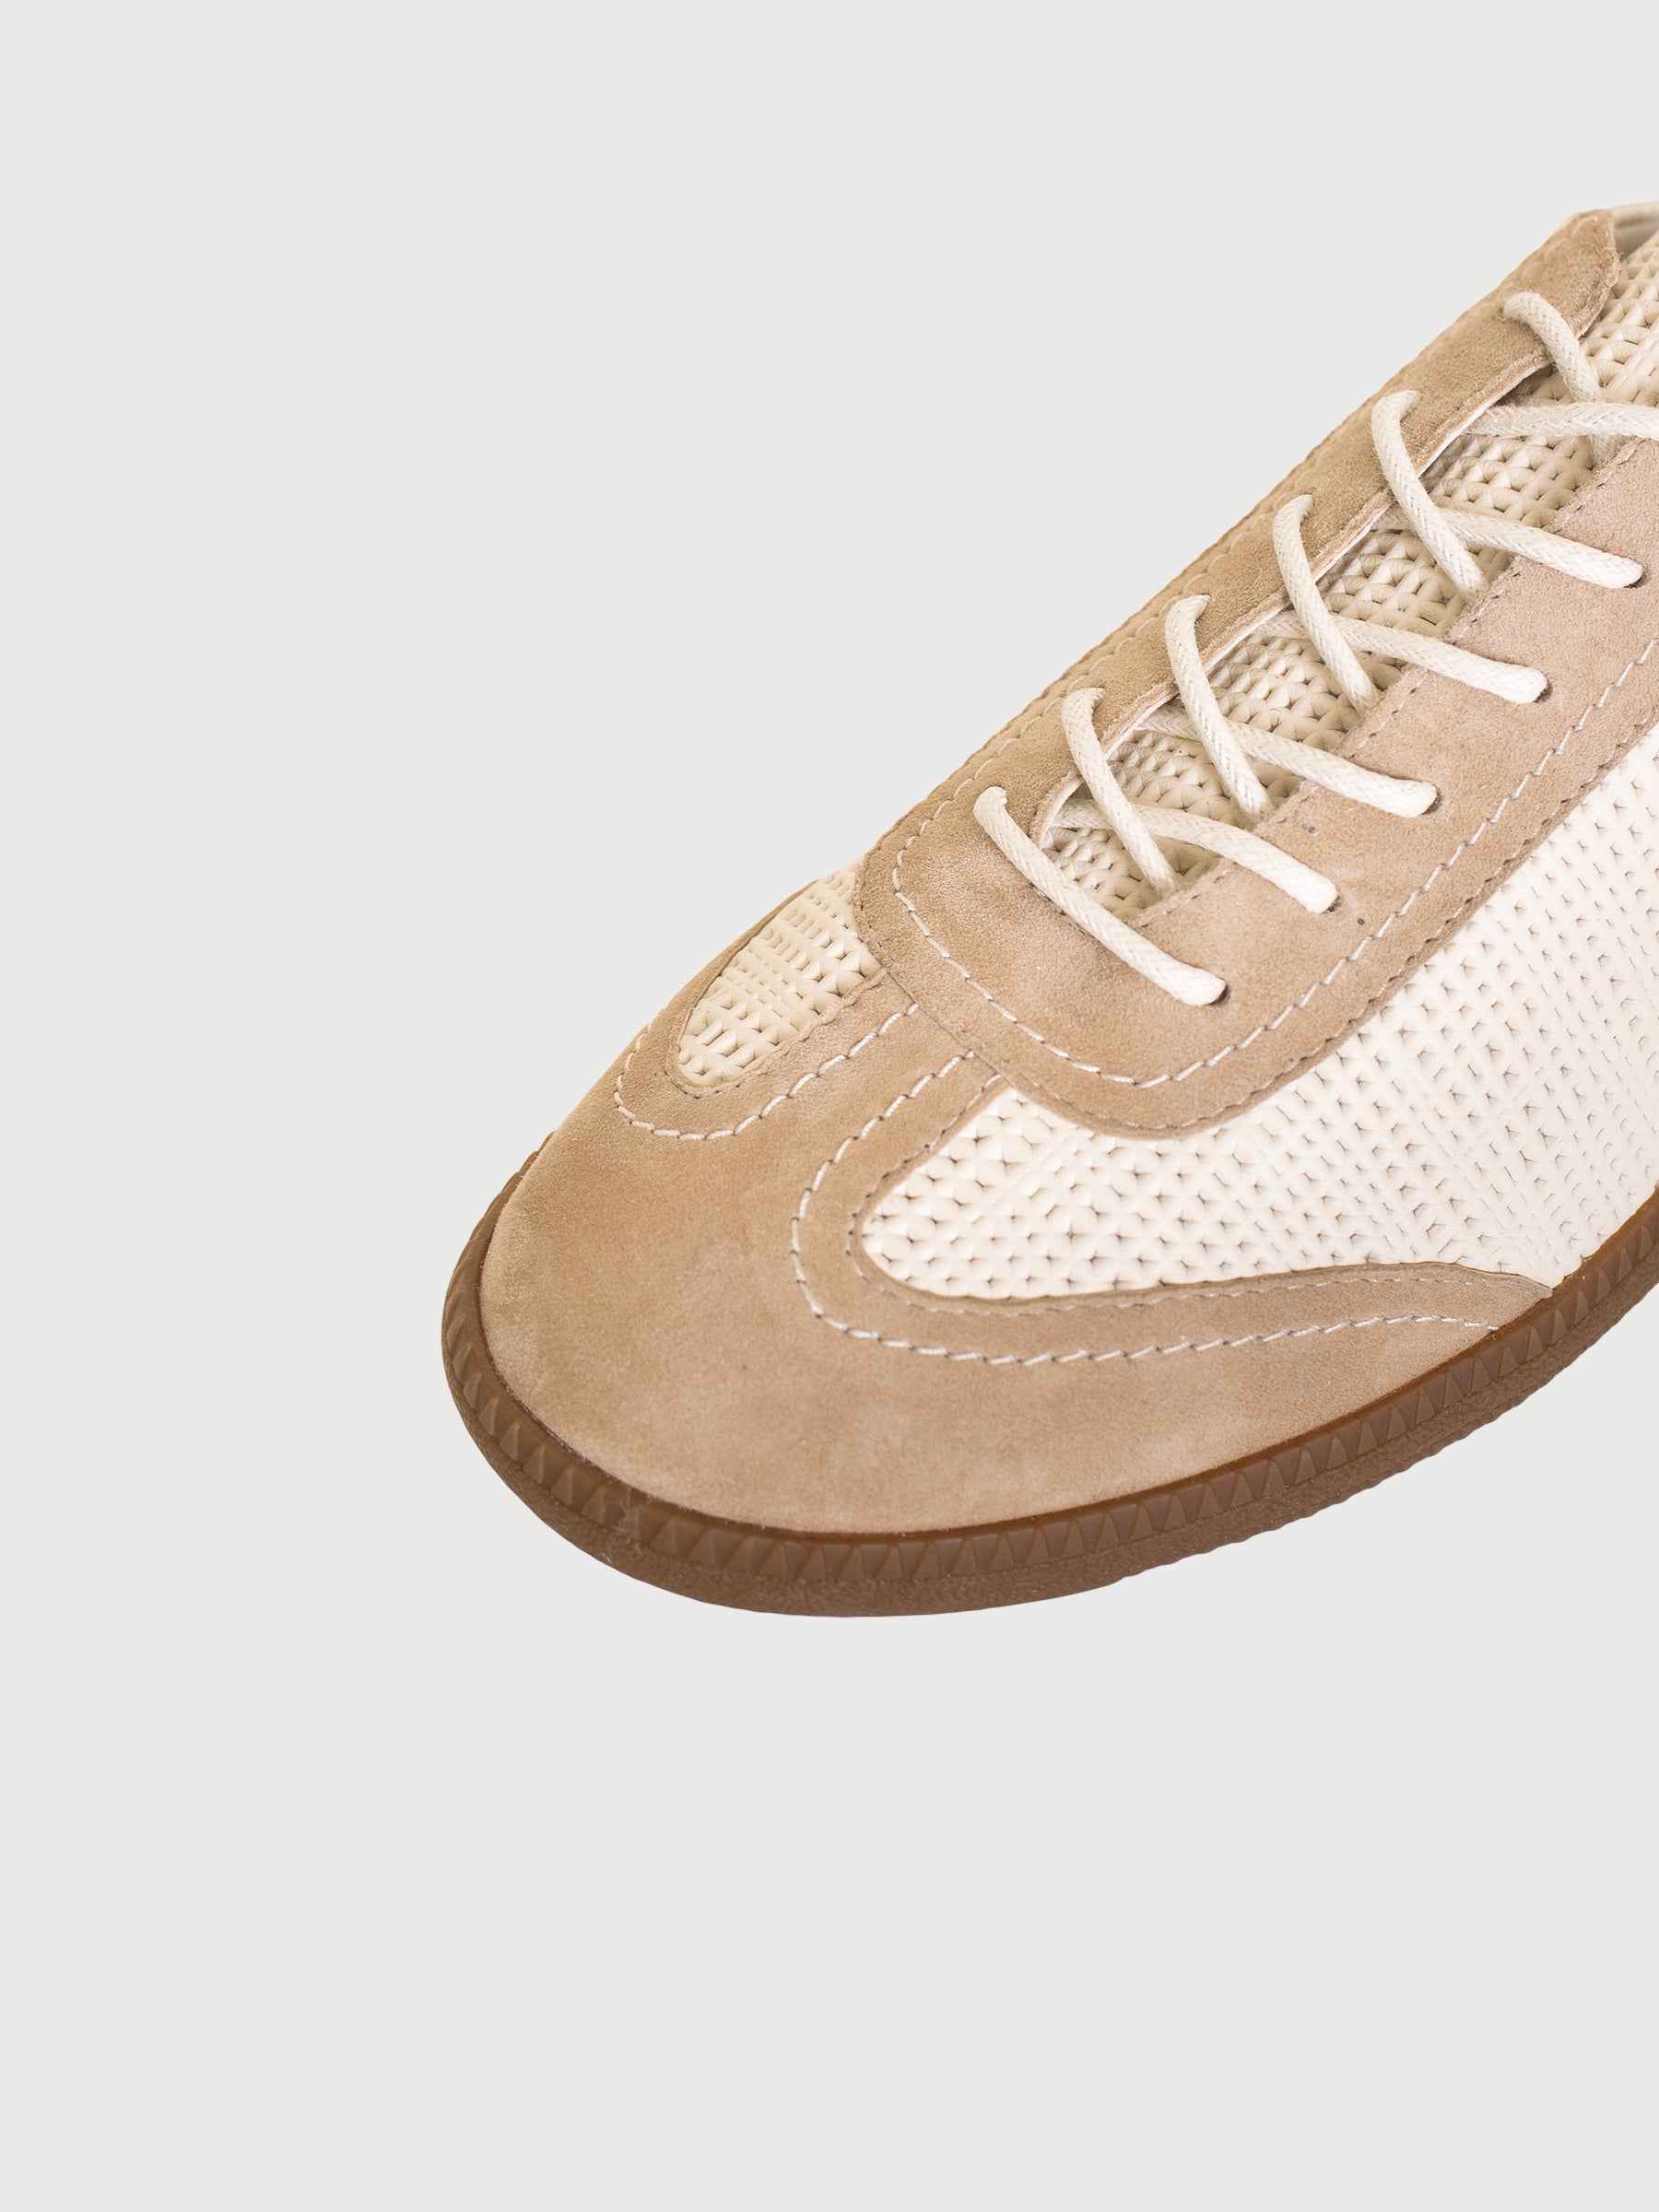 Woven Leather Sneakers